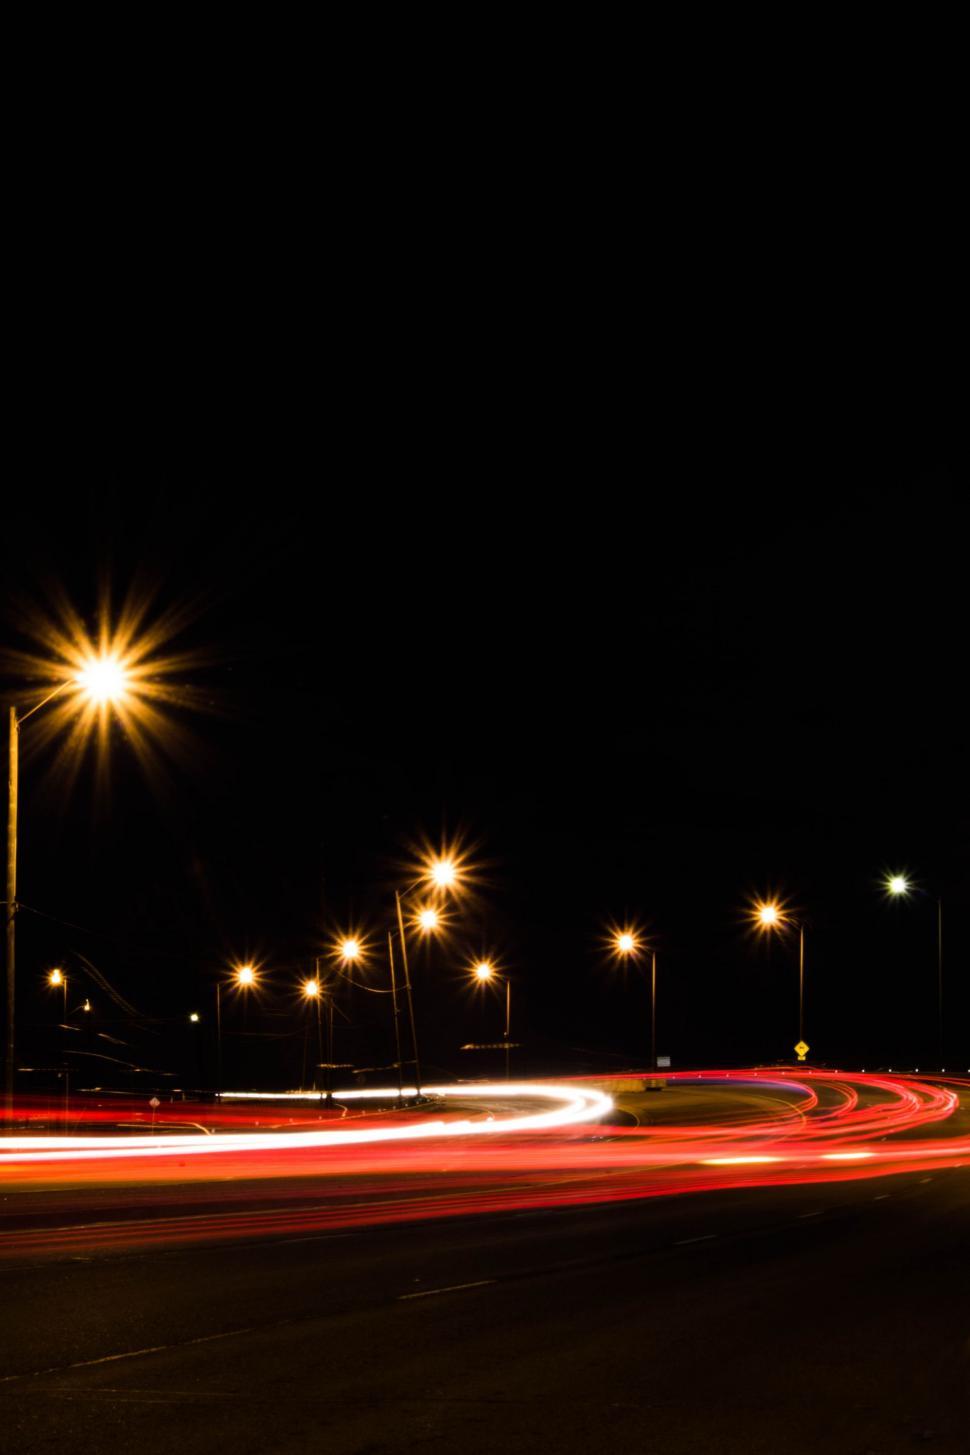 Free Image of City Street at Night With Street Lights 